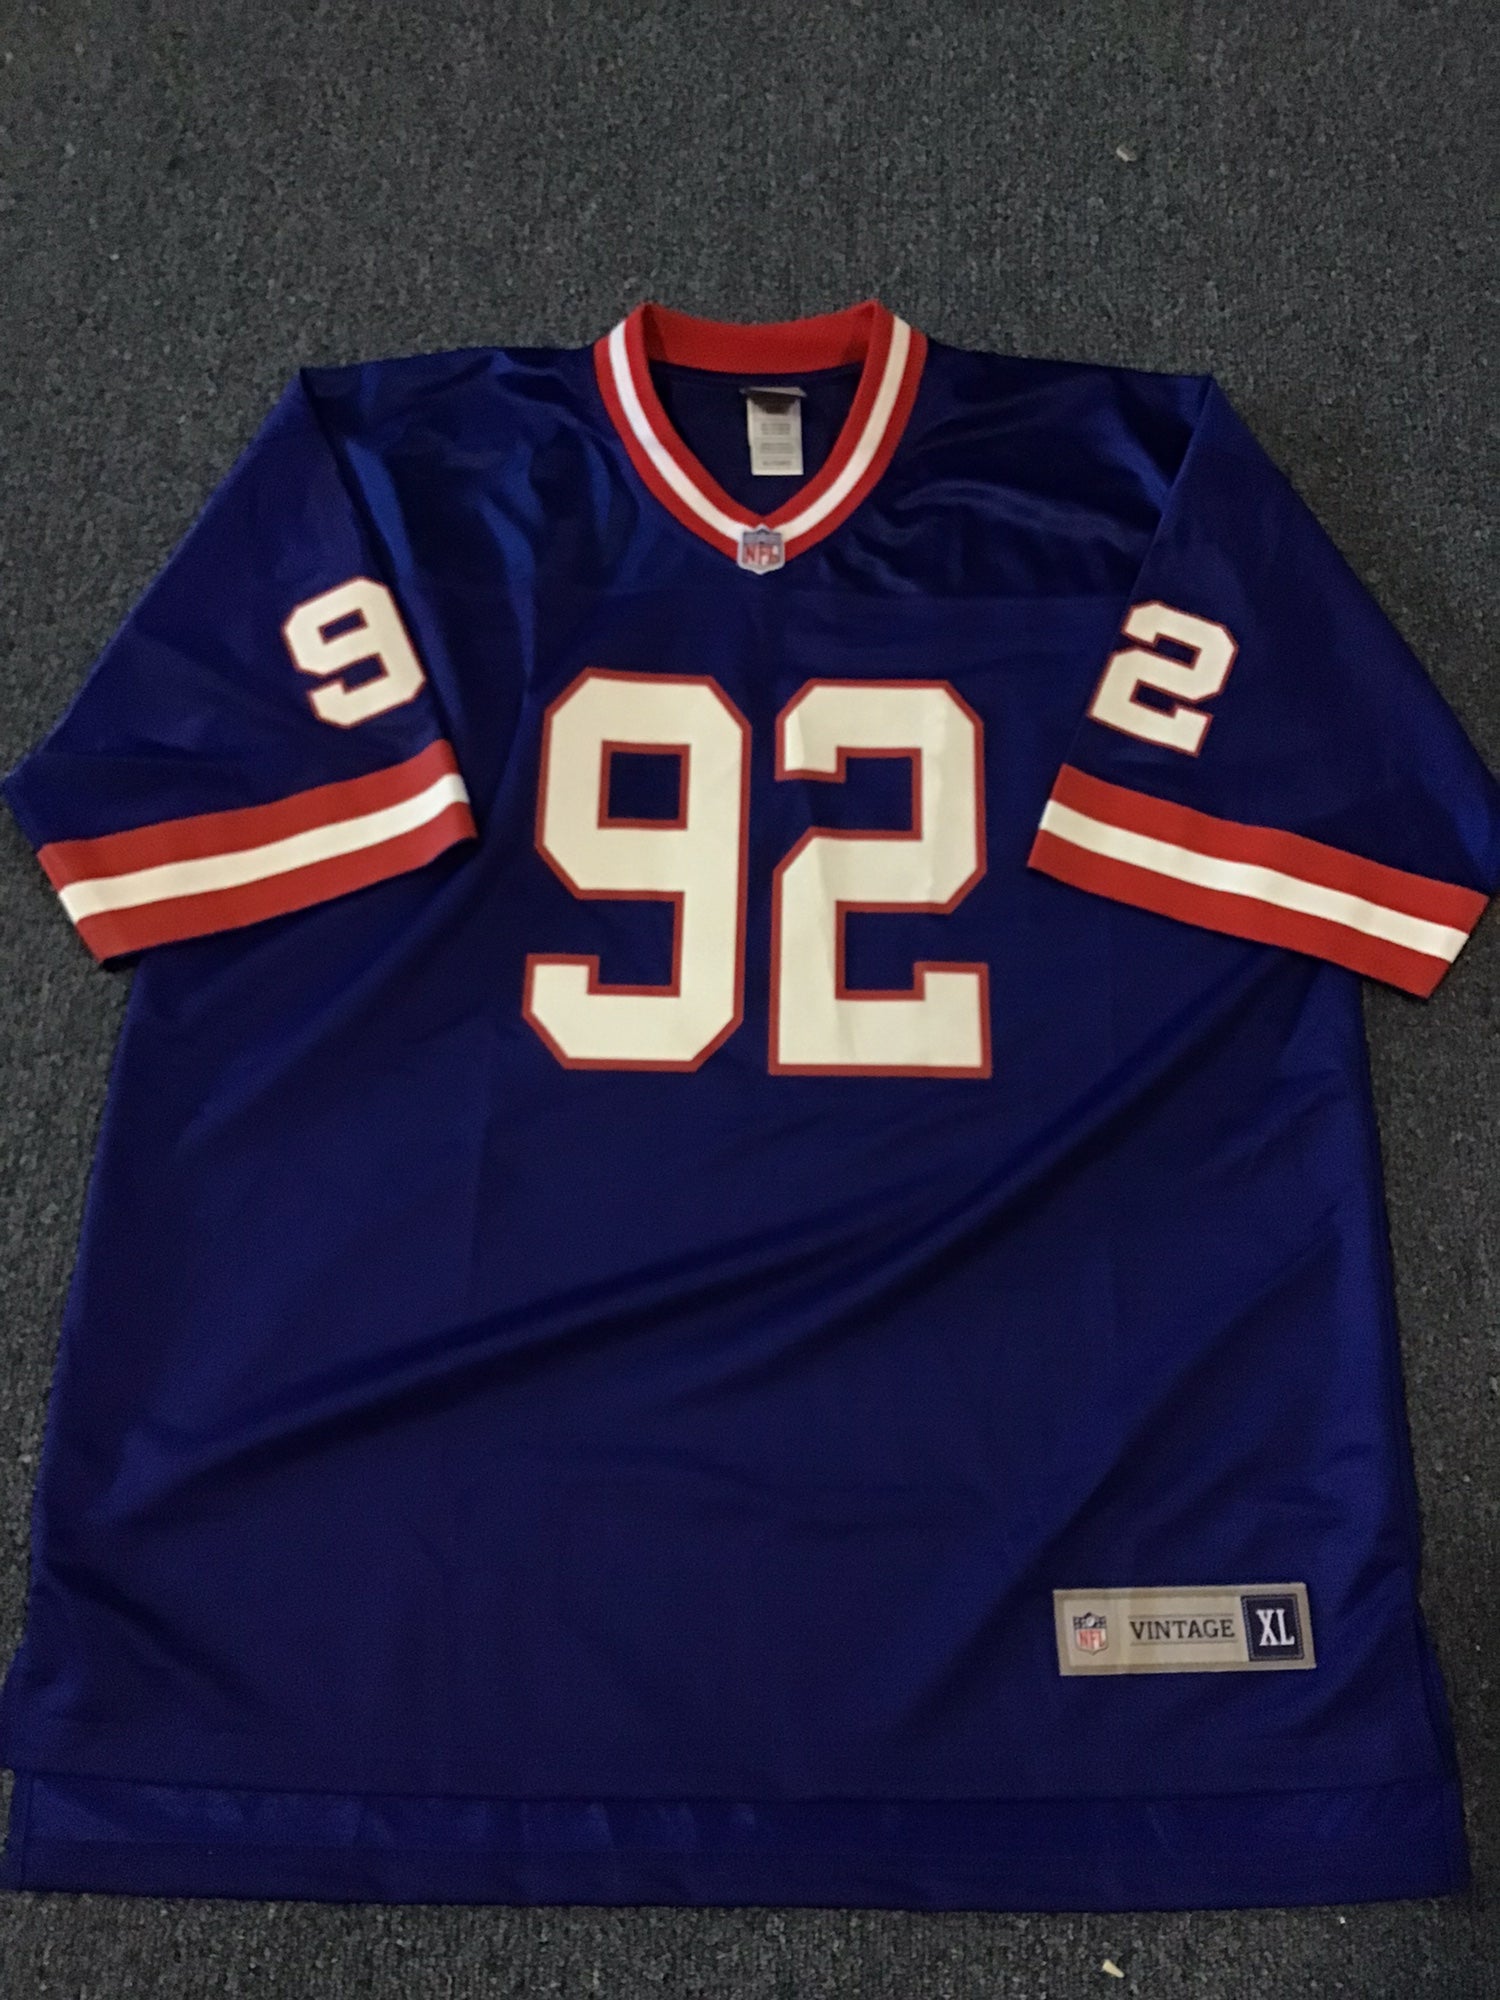 NFL Giants M. Strahan Super Bowl XLII Replica Wite Jersey 